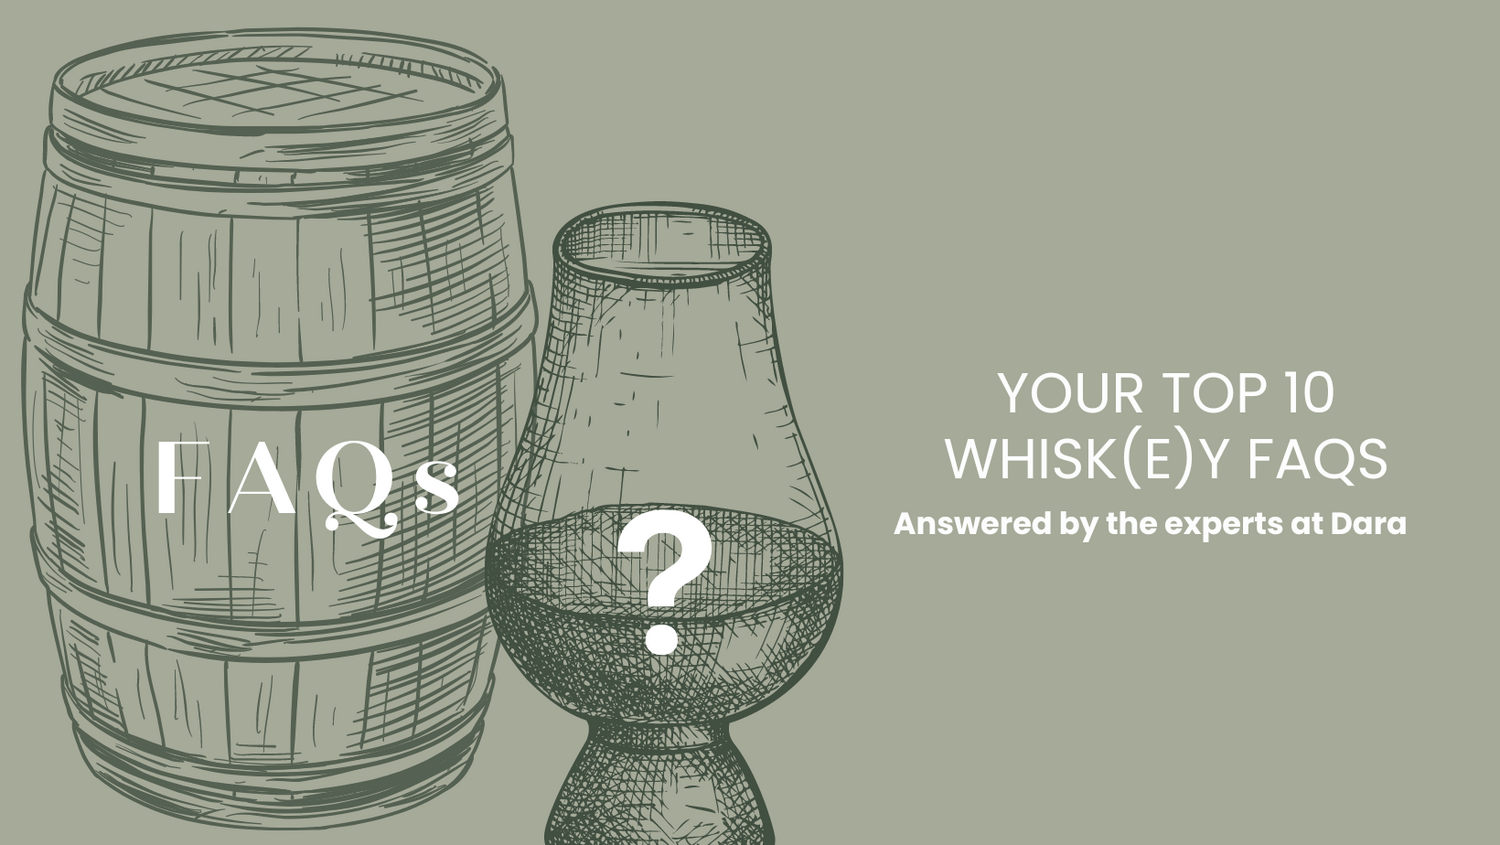 Your Top 10 Whisk(e)y FAQs